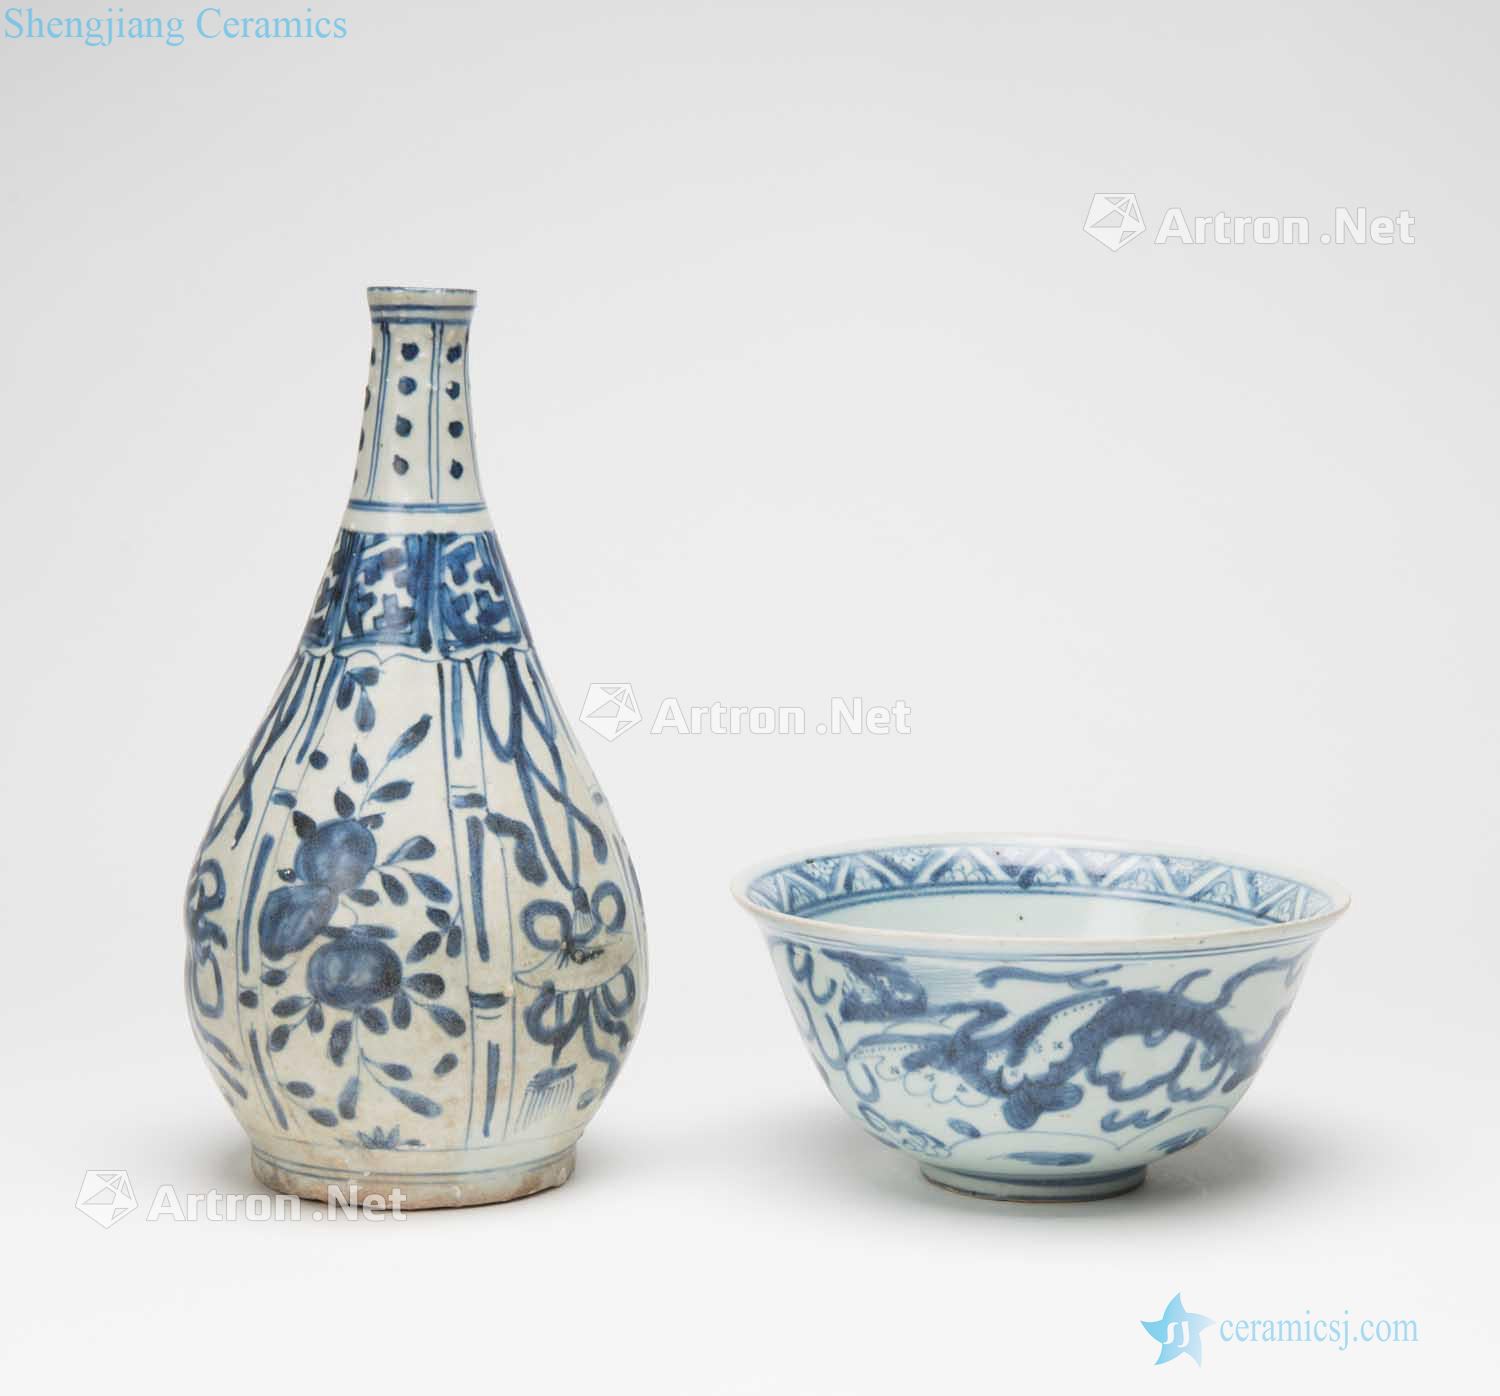 Late Ming dynasty Early 17th century Blue and white bottle and porcelain bowl